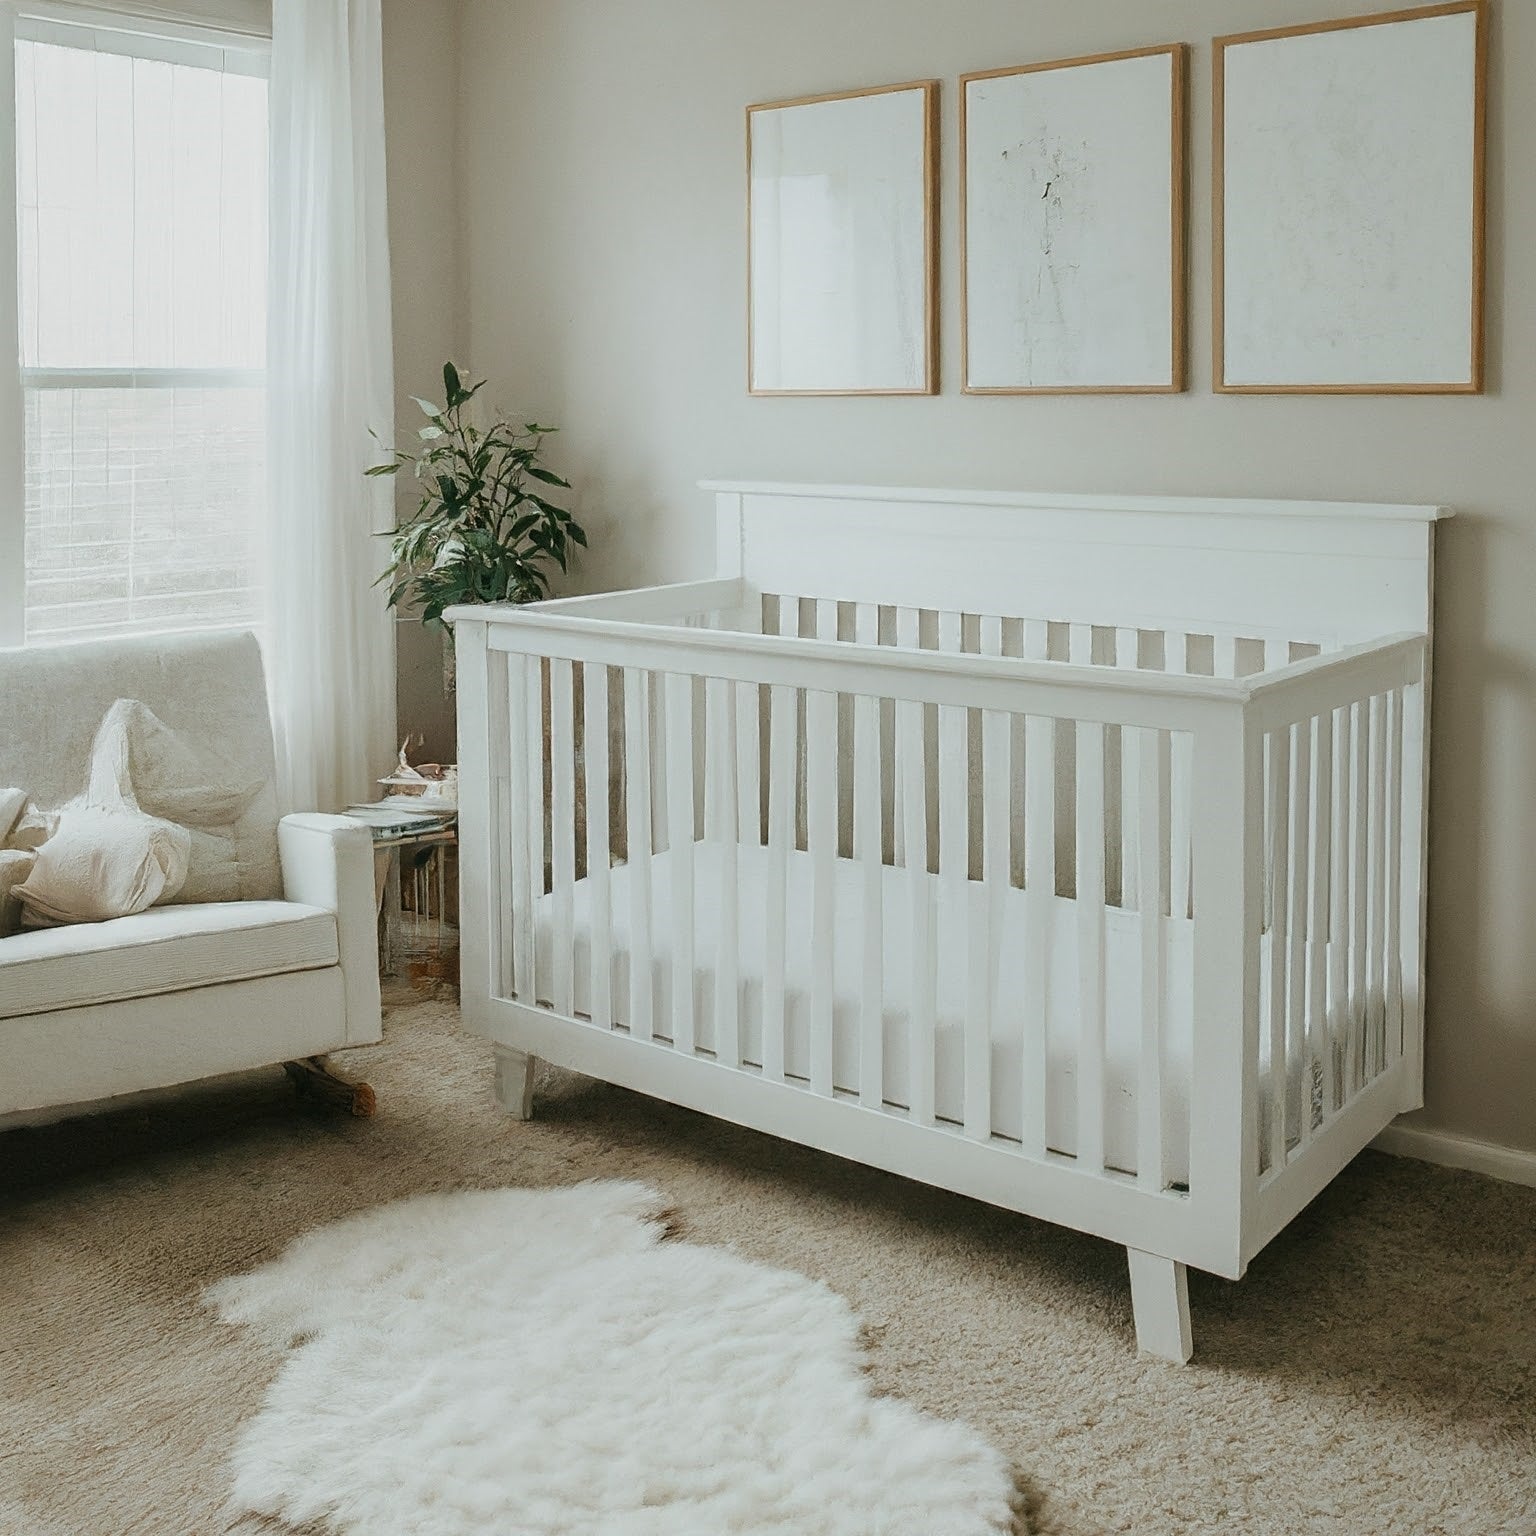 "Minimalist baby nursery featuring a crib with organic cotton crib sheets in neutral tones with simple, elegant patterns. The room has a clean, uncluttered look with modern furniture and a peaceful ambiance